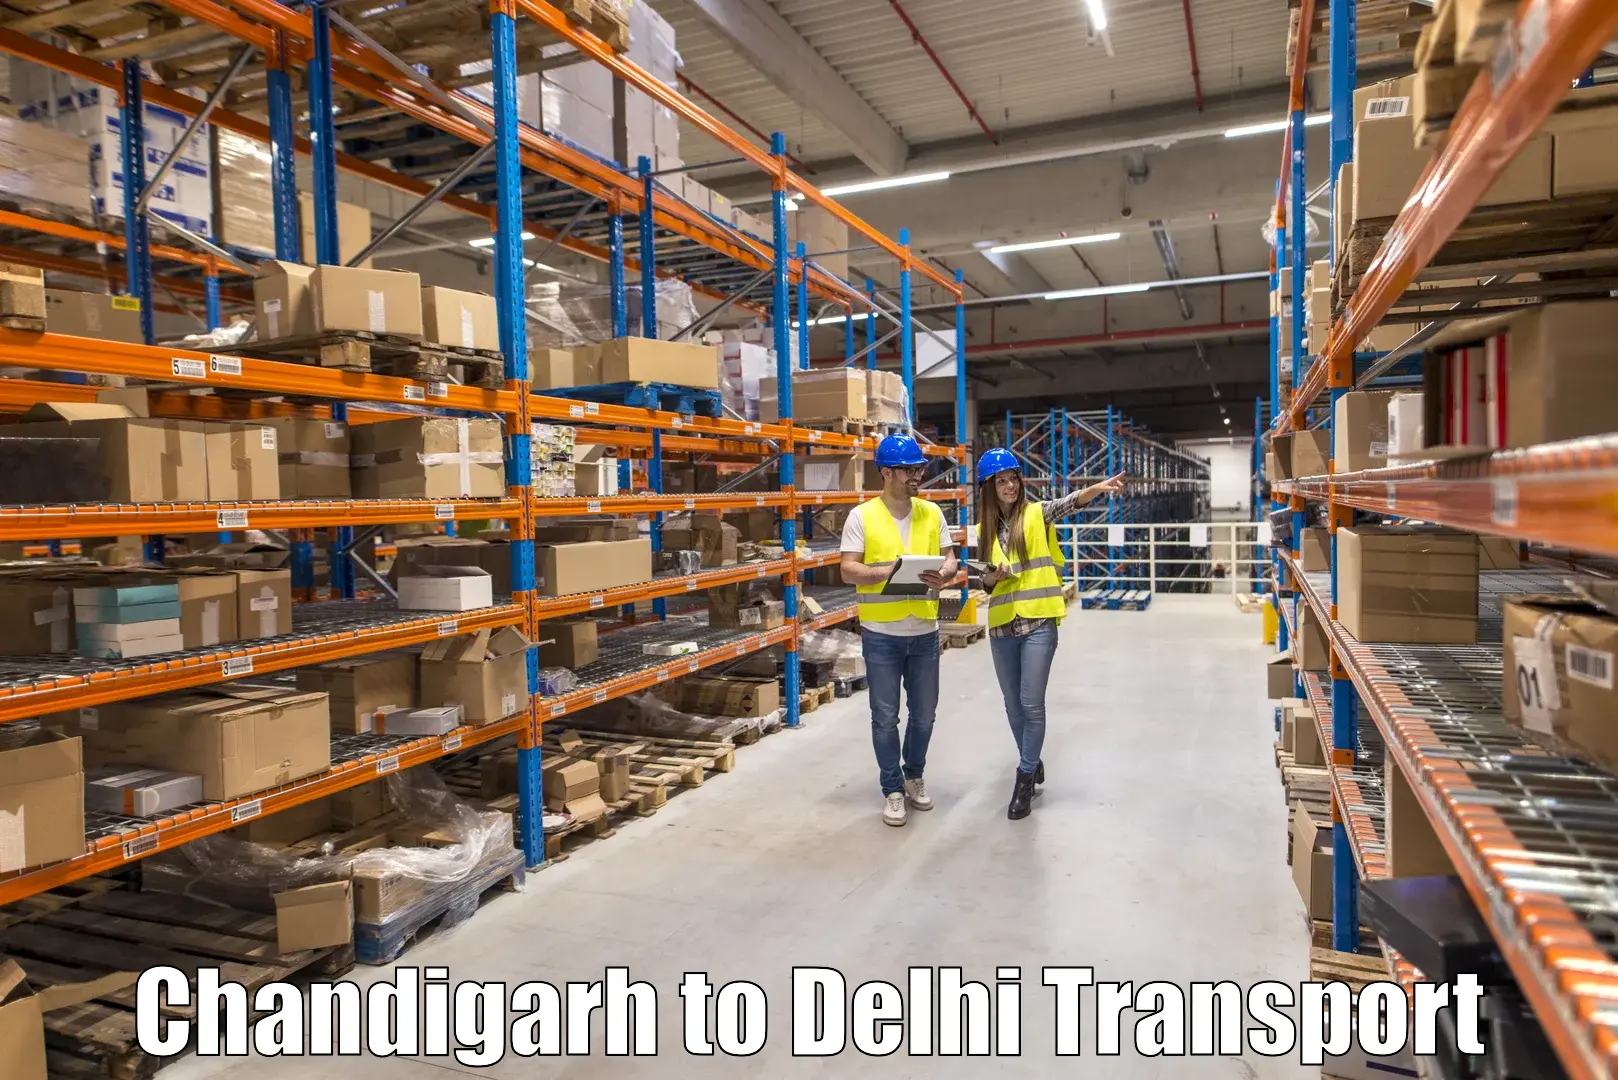 Transportation solution services Chandigarh to Lodhi Road